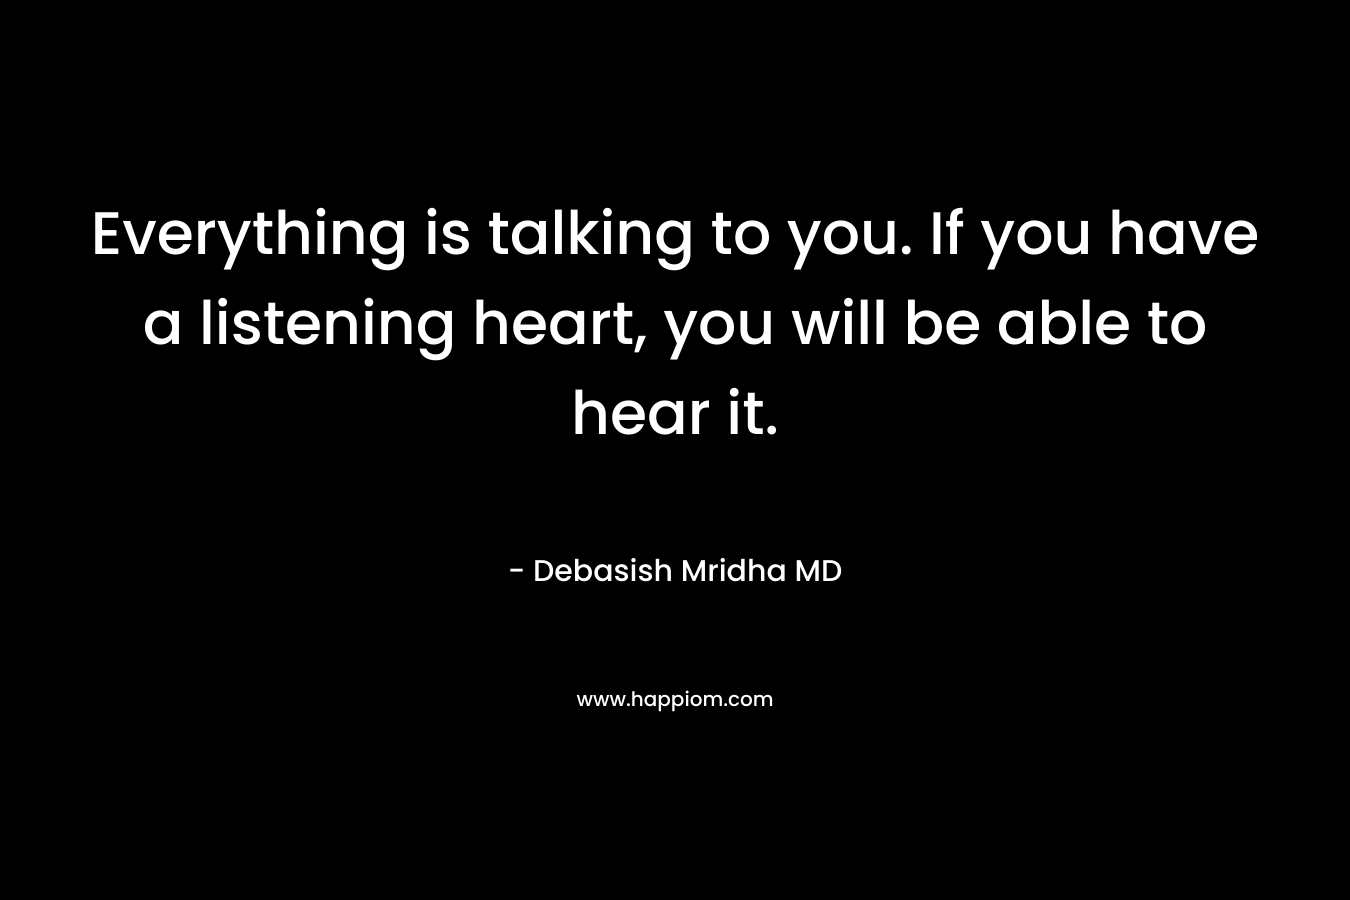 Everything is talking to you. If you have a listening heart, you will be able to hear it.